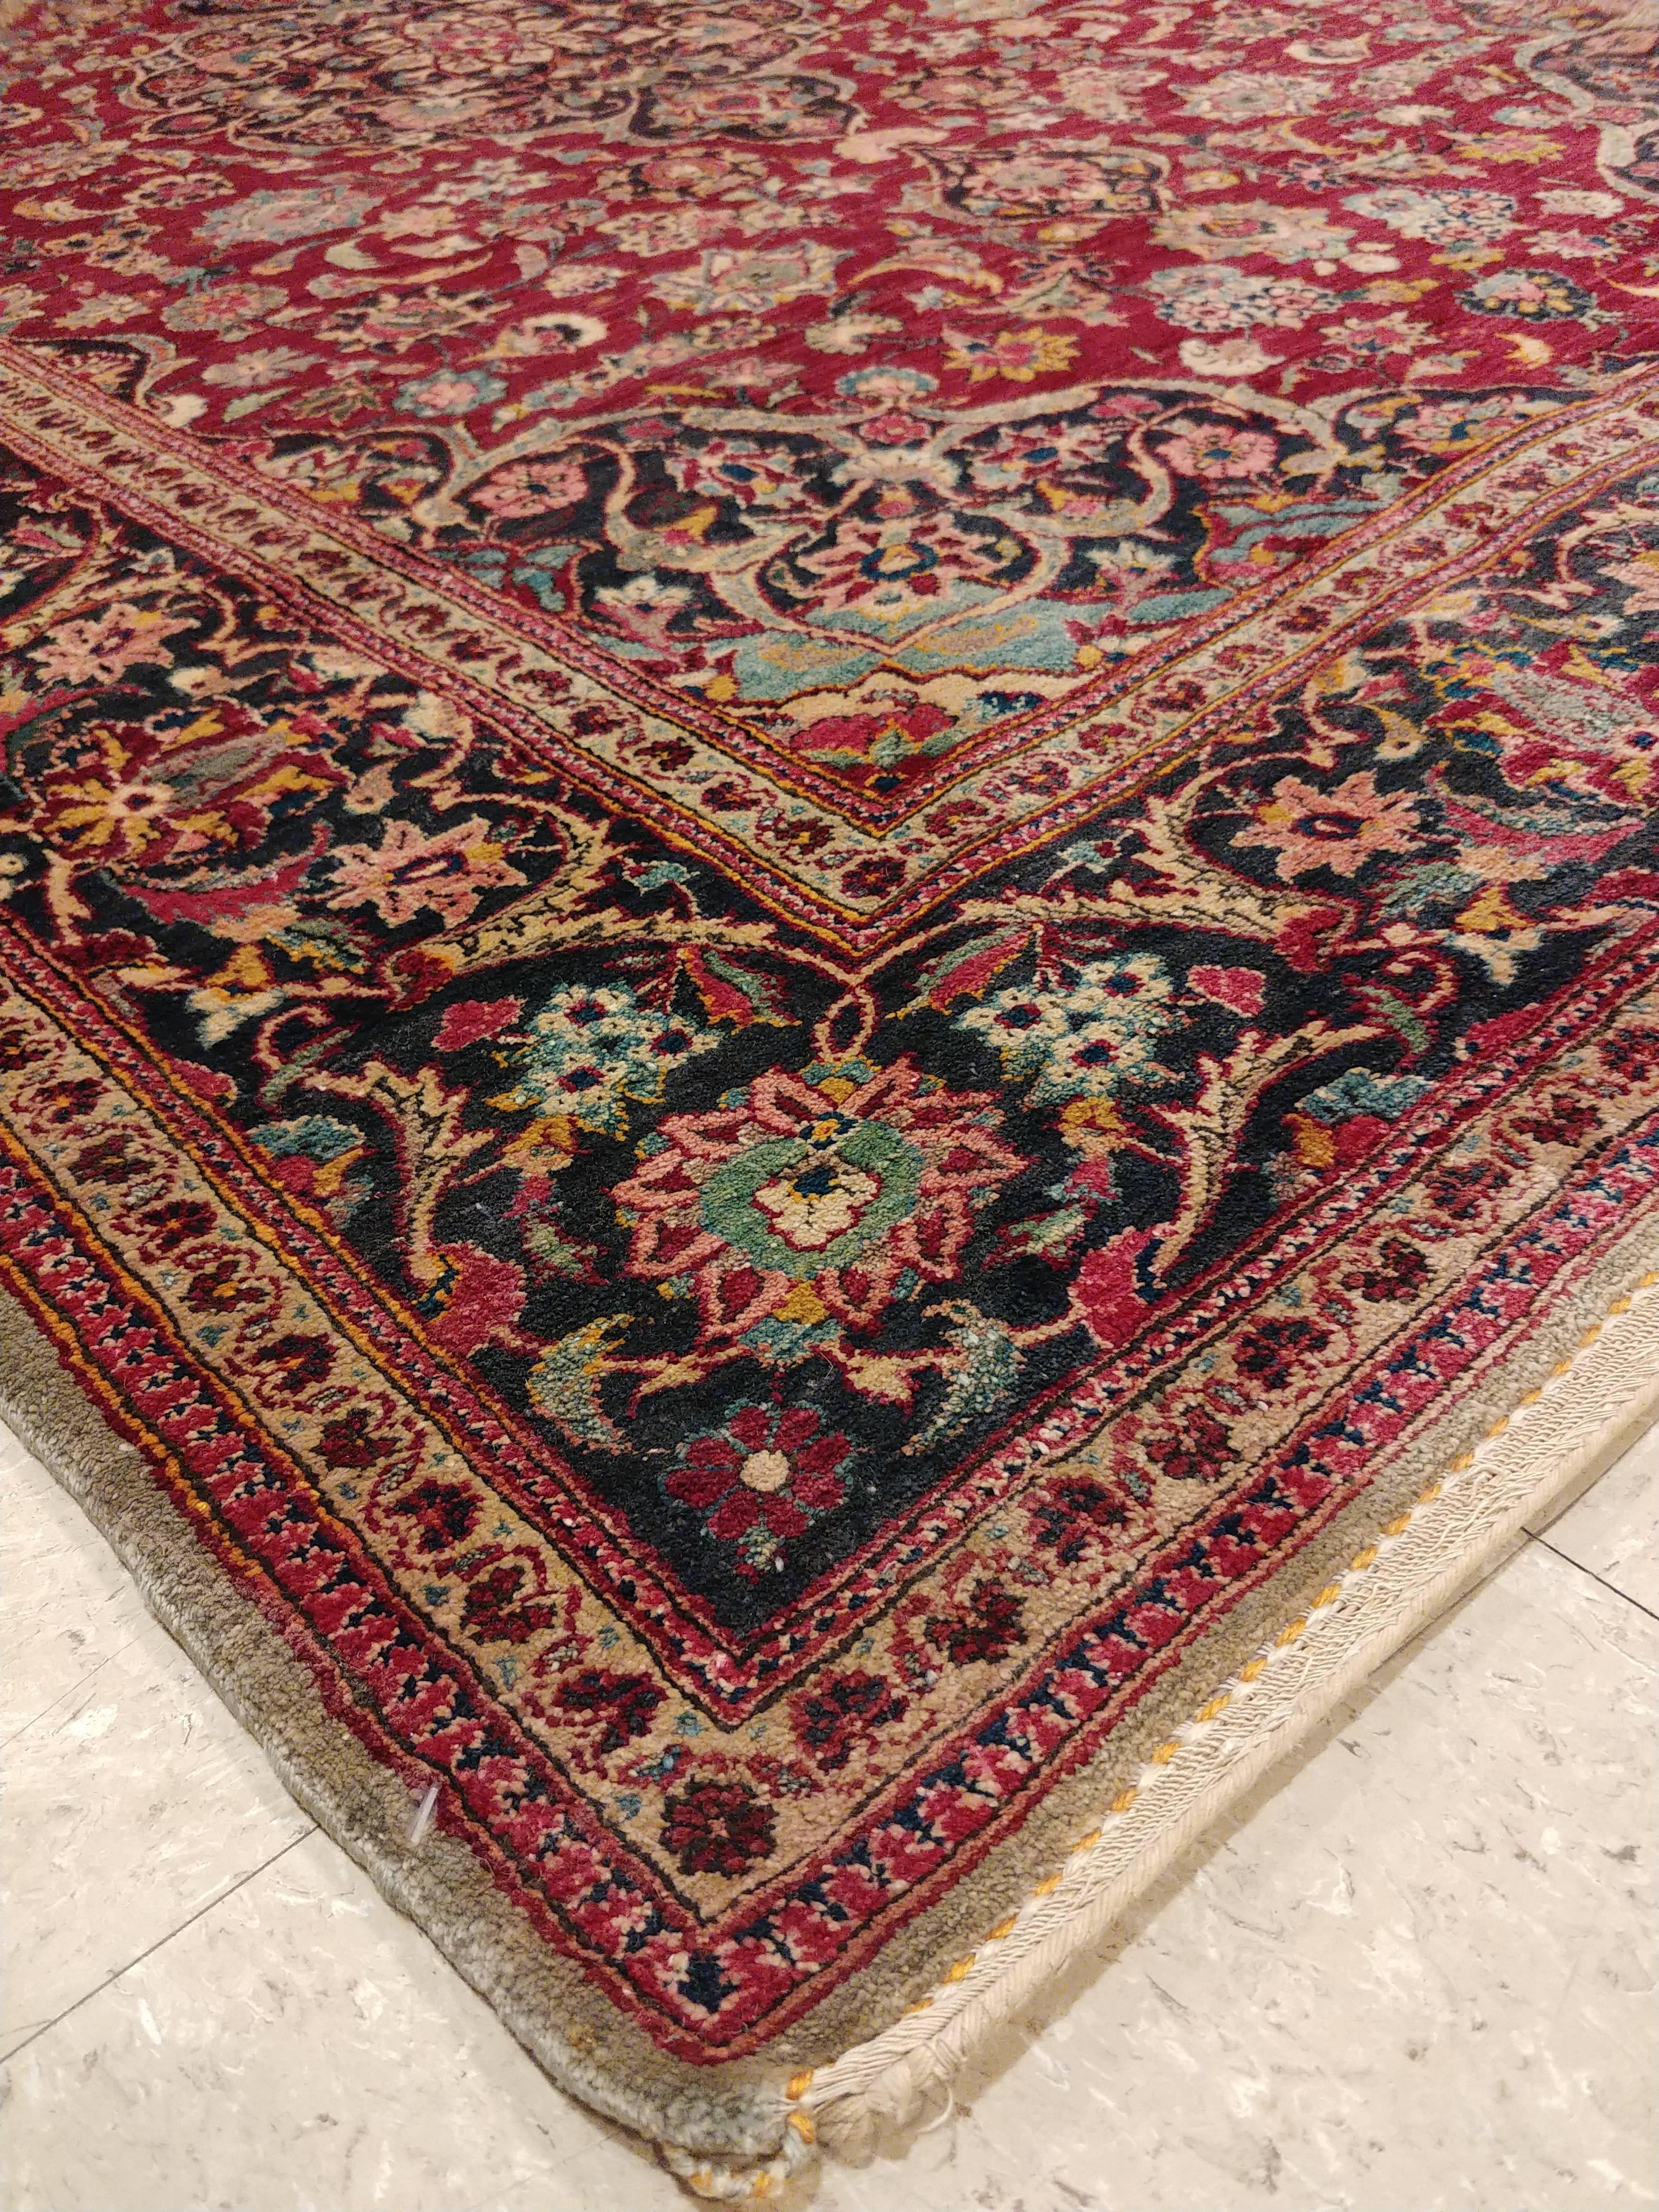 Persian antique Kashan rugs are among the very finest Persian rugs and carpets. Kashan was a center of silk production since Safavid times and some of the best classical Persian silk rugs have been attributed to Kashan.
At the end of the nineteenth